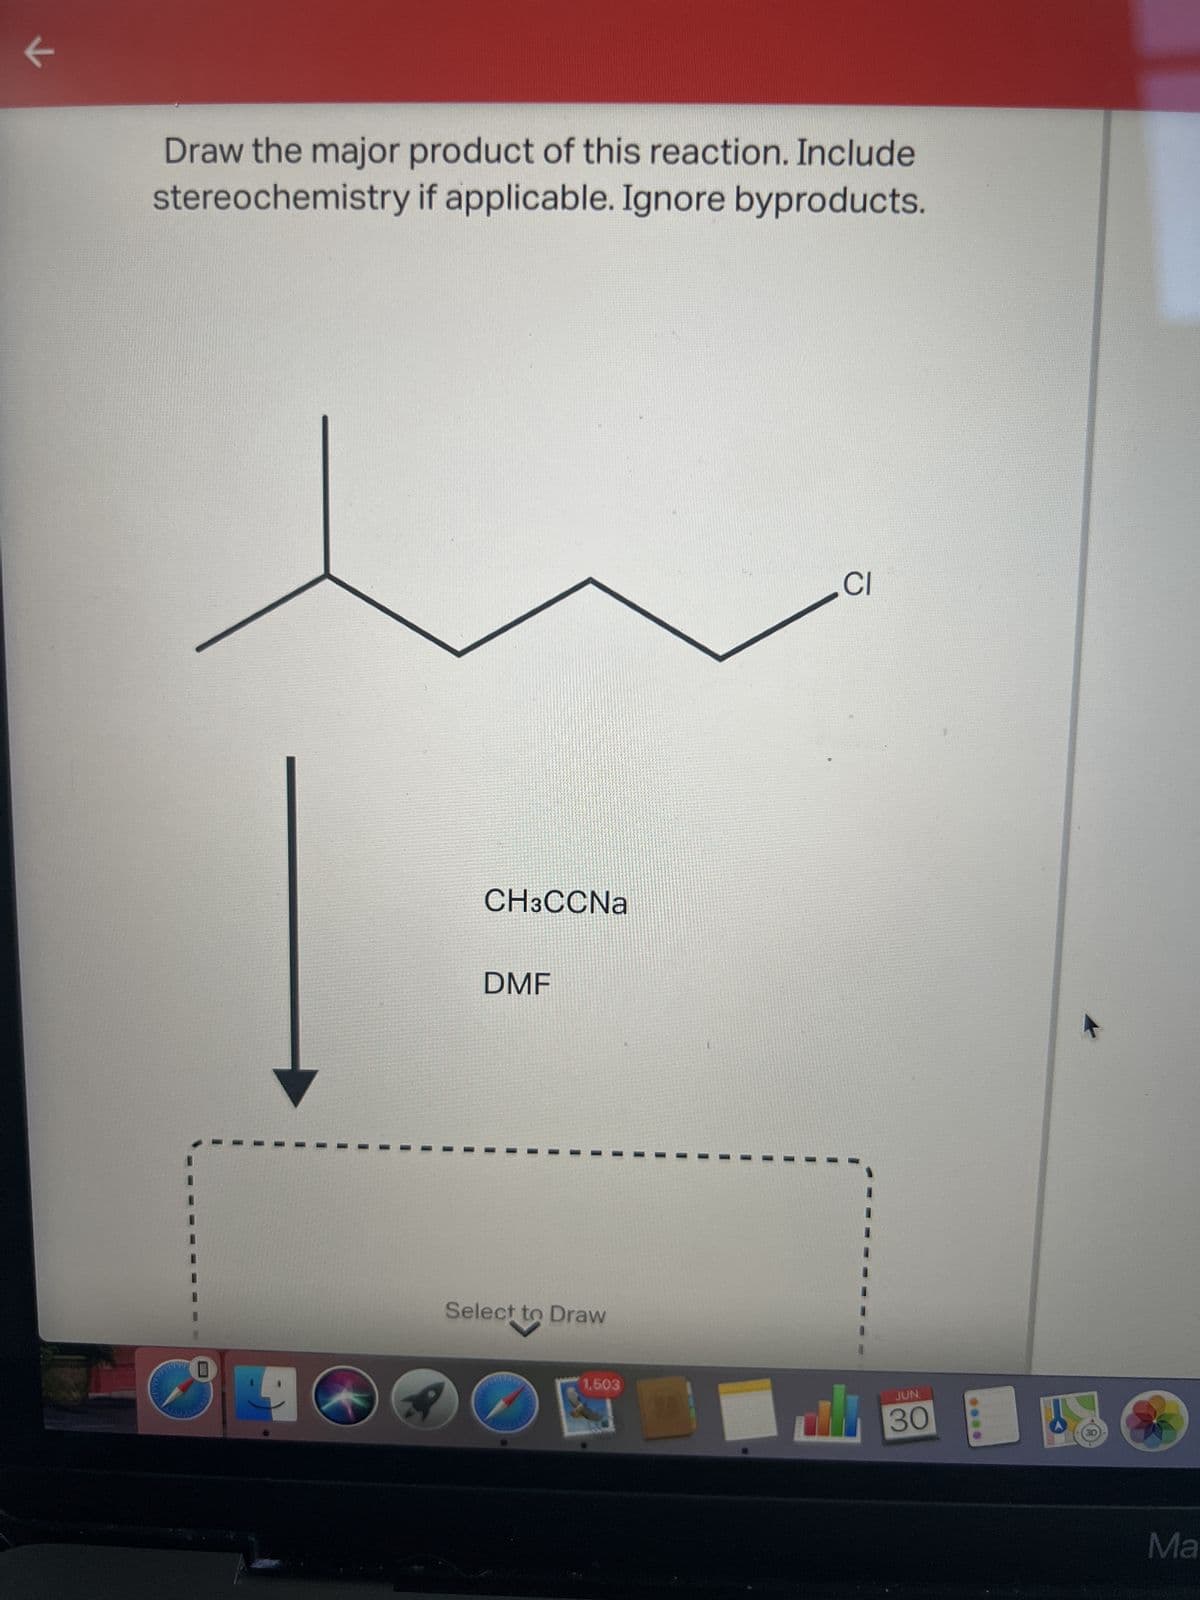 к
K
Draw the major product of this reaction. Include
stereochemistry if applicable. Ignore byproducts.
U
D
CH3CCNa
DMF
+ to
Select to Draw
2
1,503
CI
JUN
(19) al 30
Ma